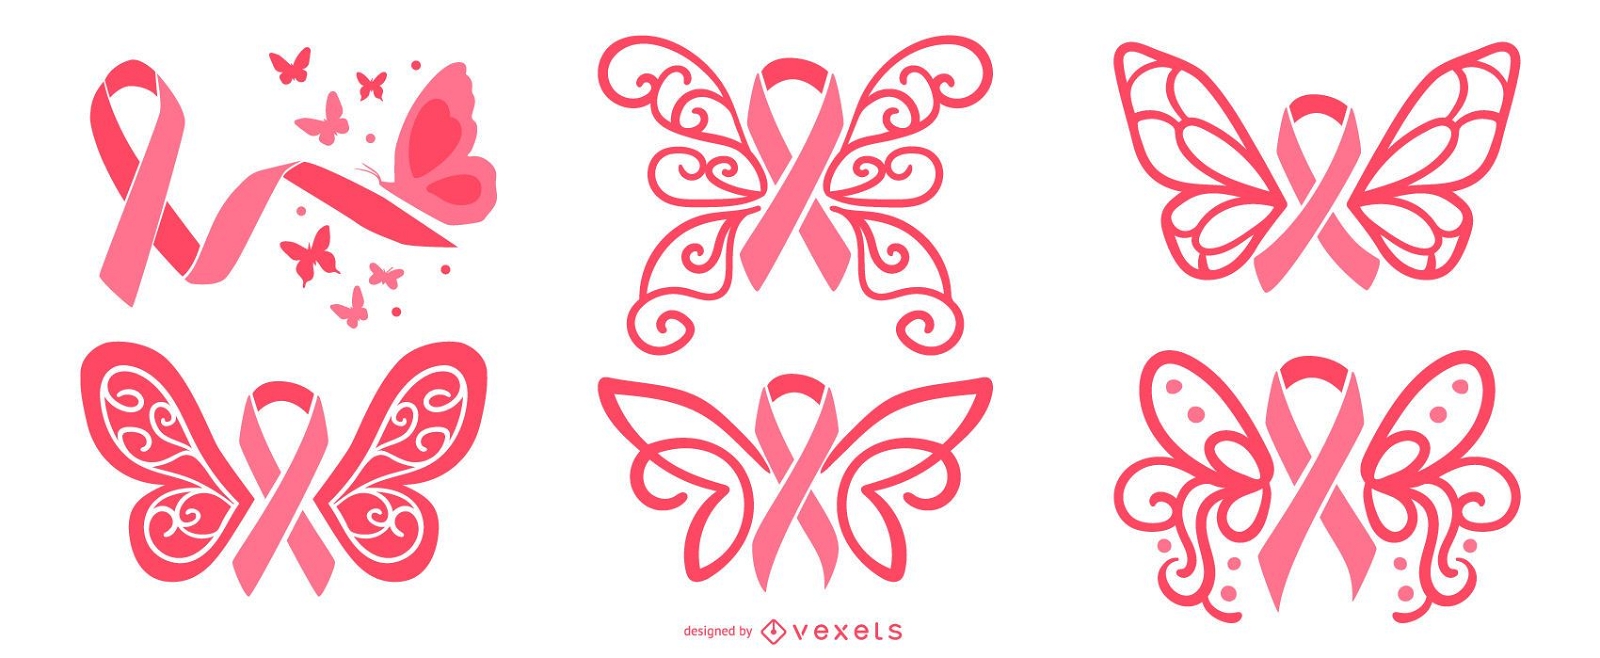 Breast cancer butterfly ribbons set